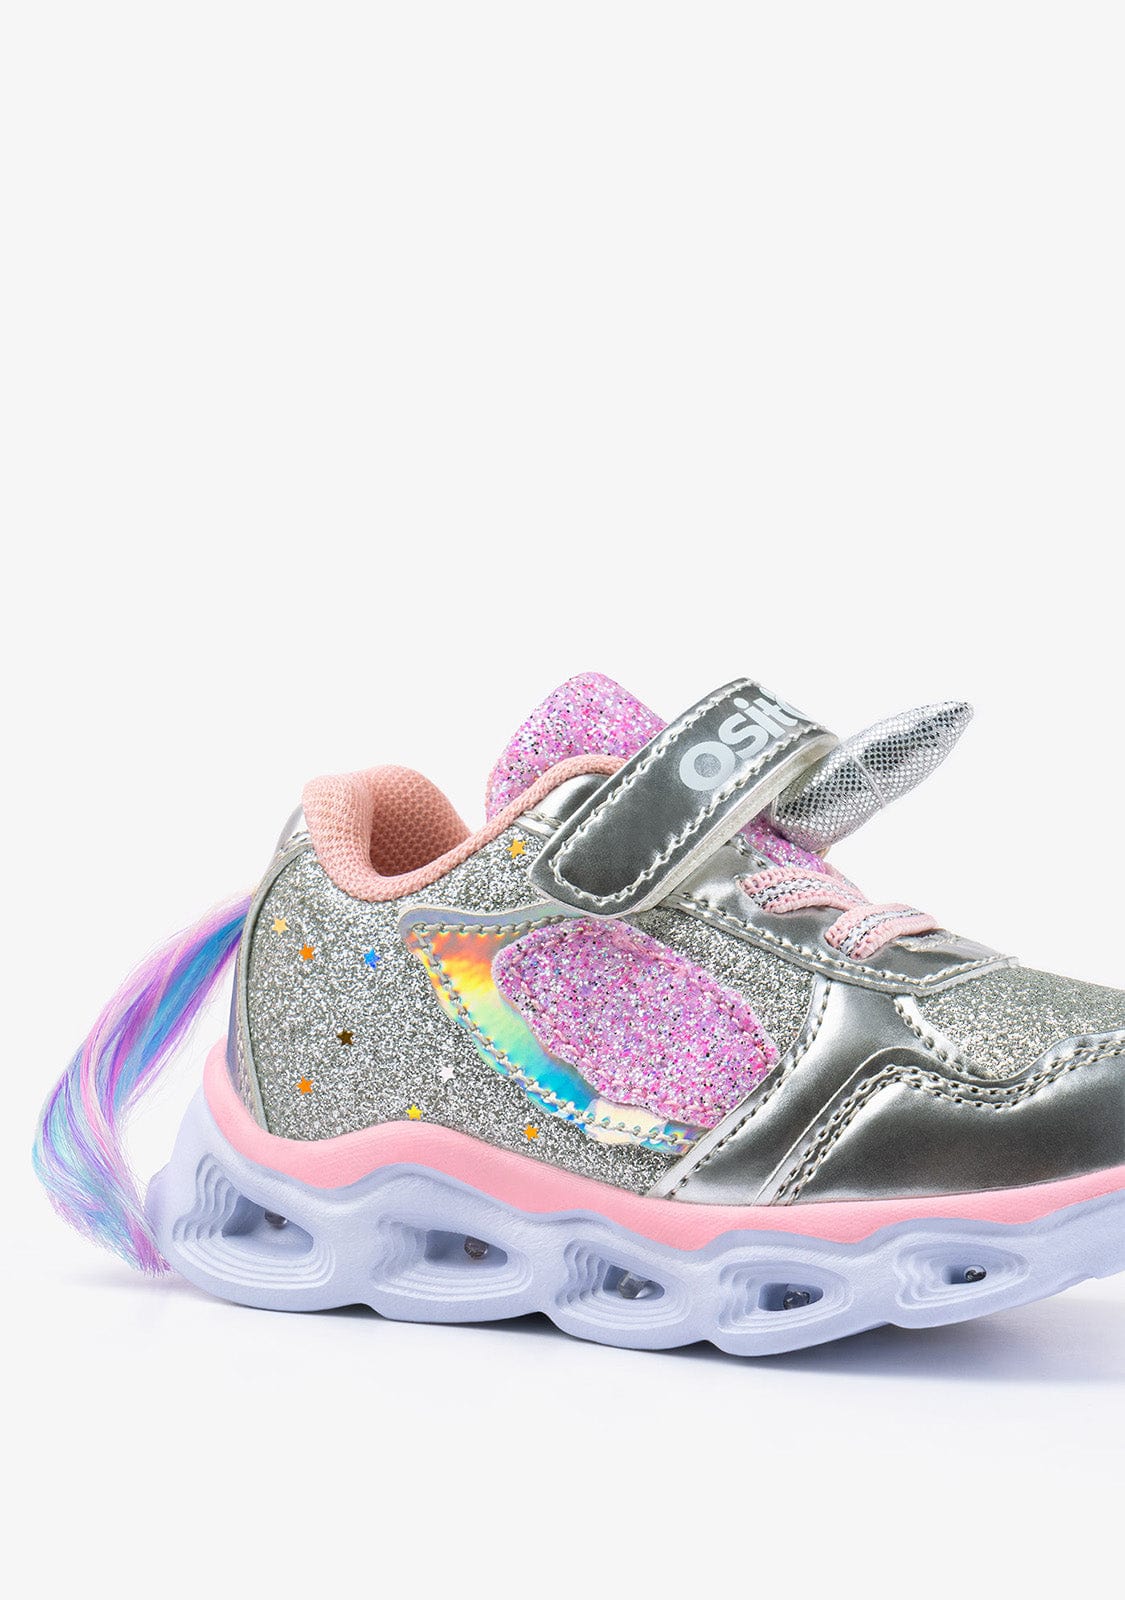 OSITO Shoes Baby's Unicorn Sneakers with Lights